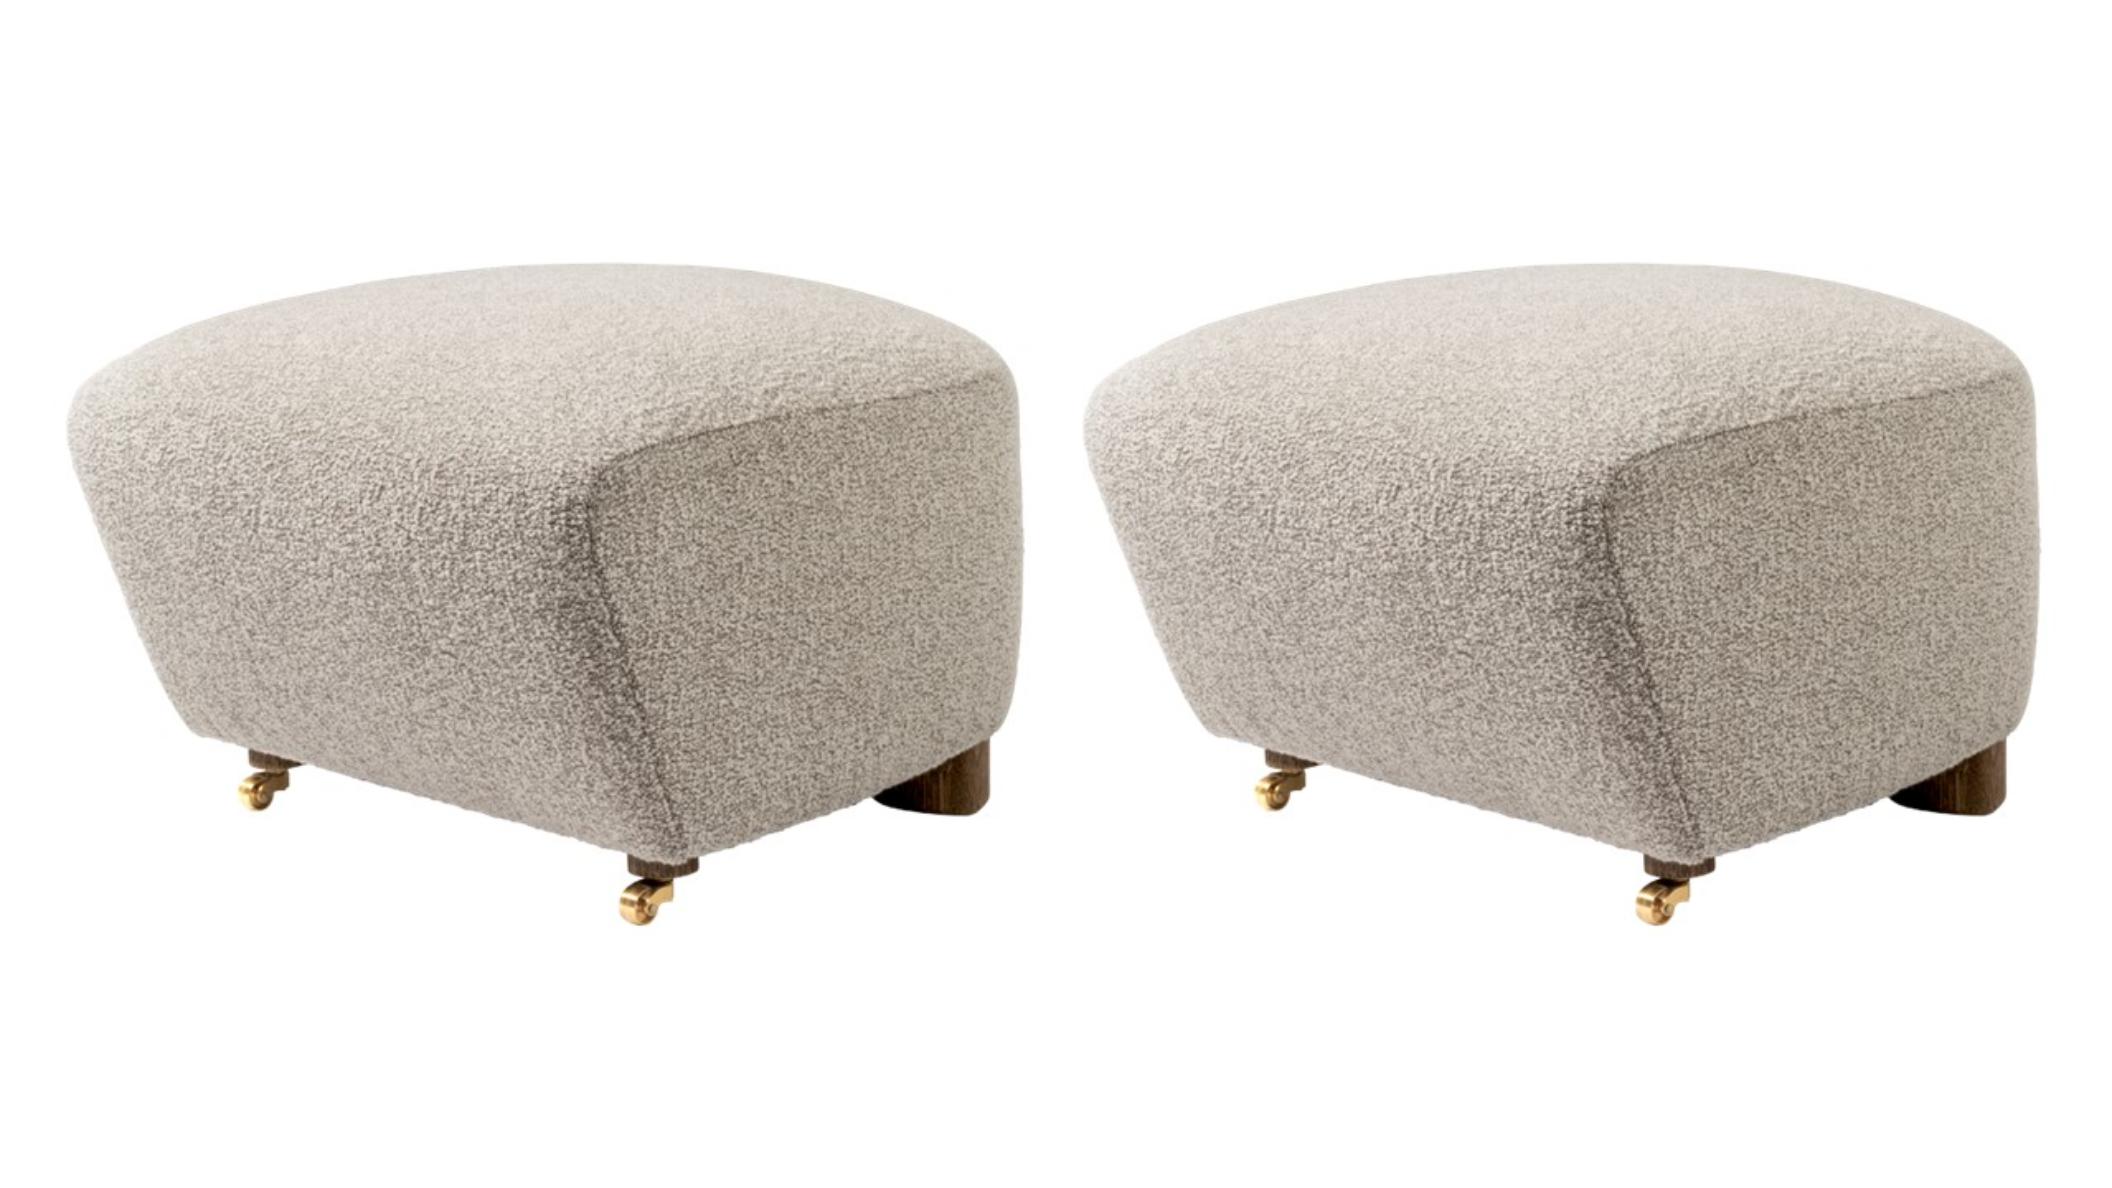 Set of 2 light Beige smoked oak Sahco zero the tired man footstool by Lassen
Dimensions: W 55 x D 53 x H 36 cm 
Materials: Textile

Flemming Lassen designed the overstuffed easy chair, The Tired Man, for The Copenhagen Cabinetmakers’ Guild